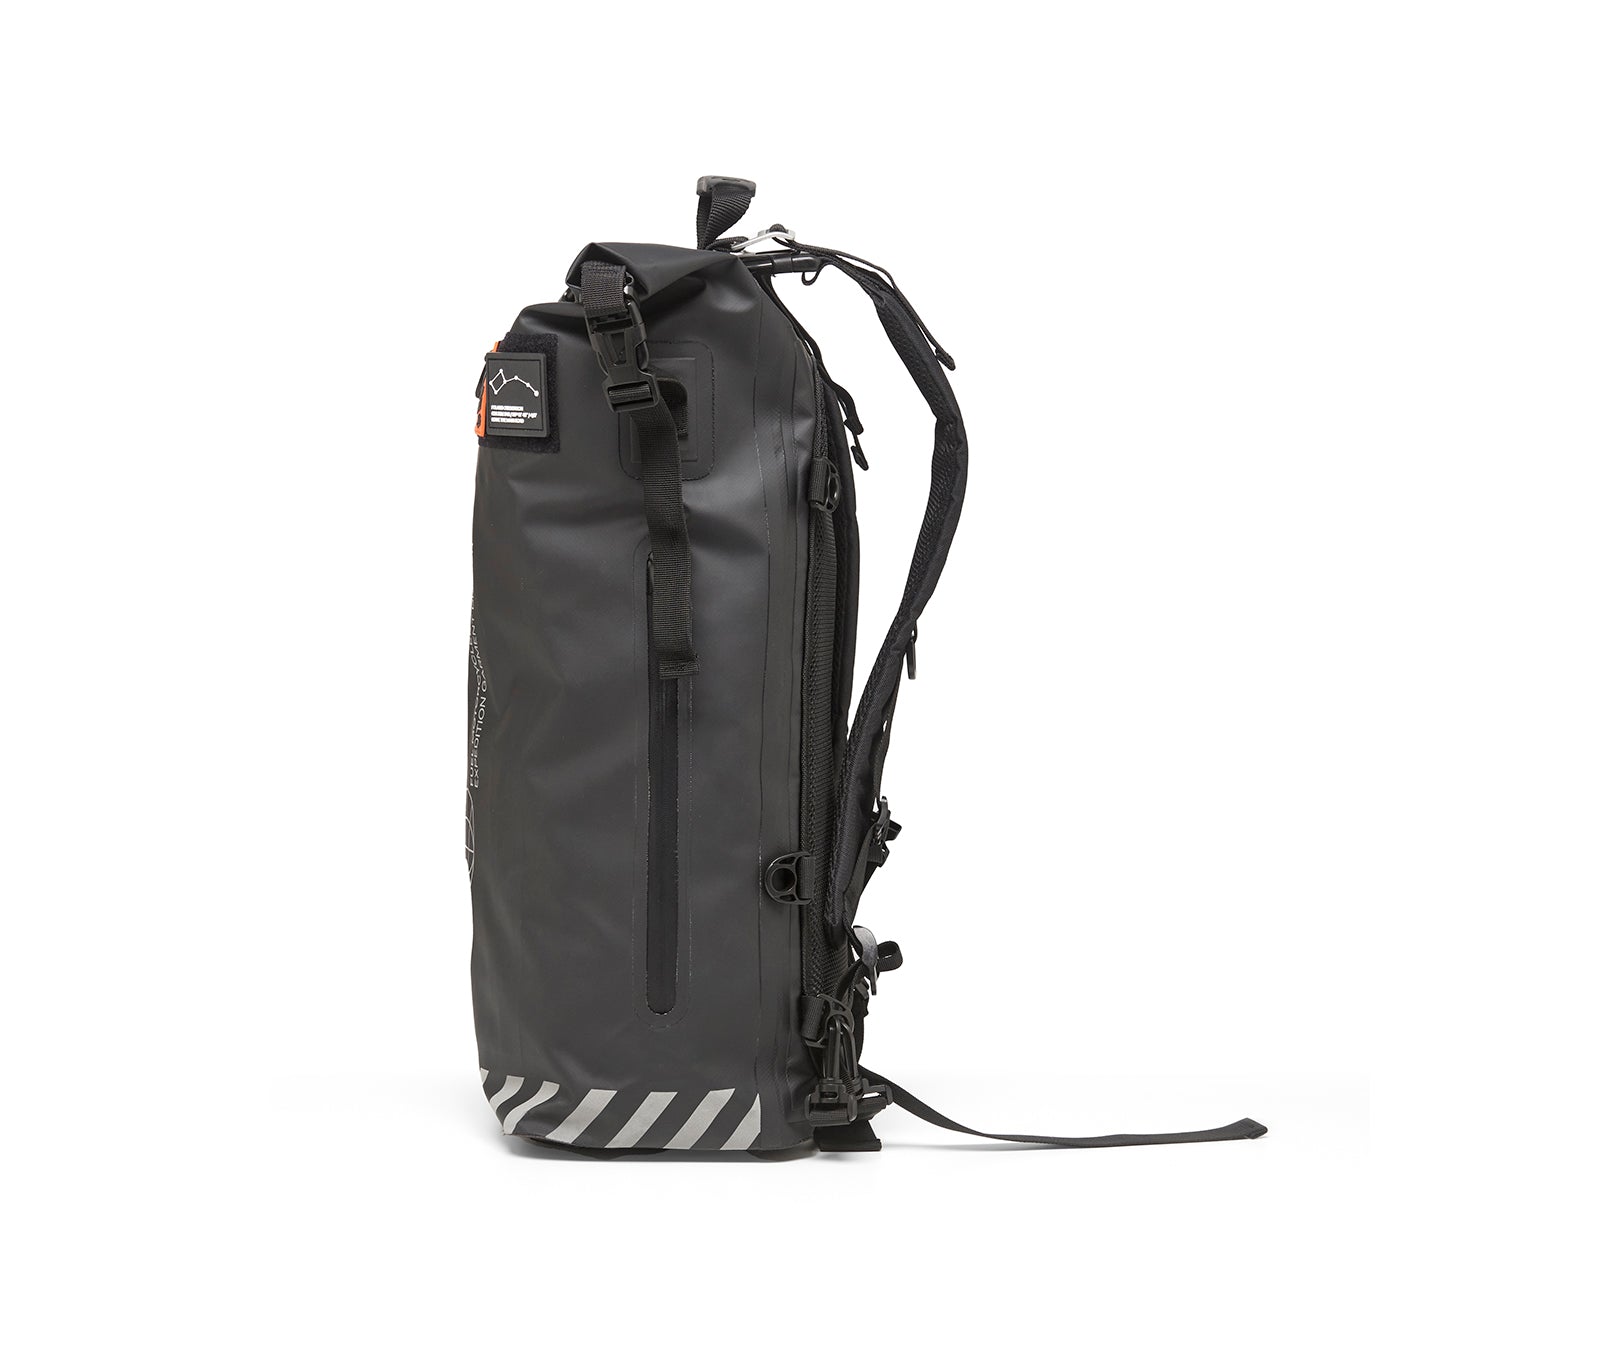 The Expedition Backpack by Fuel Motorcycles